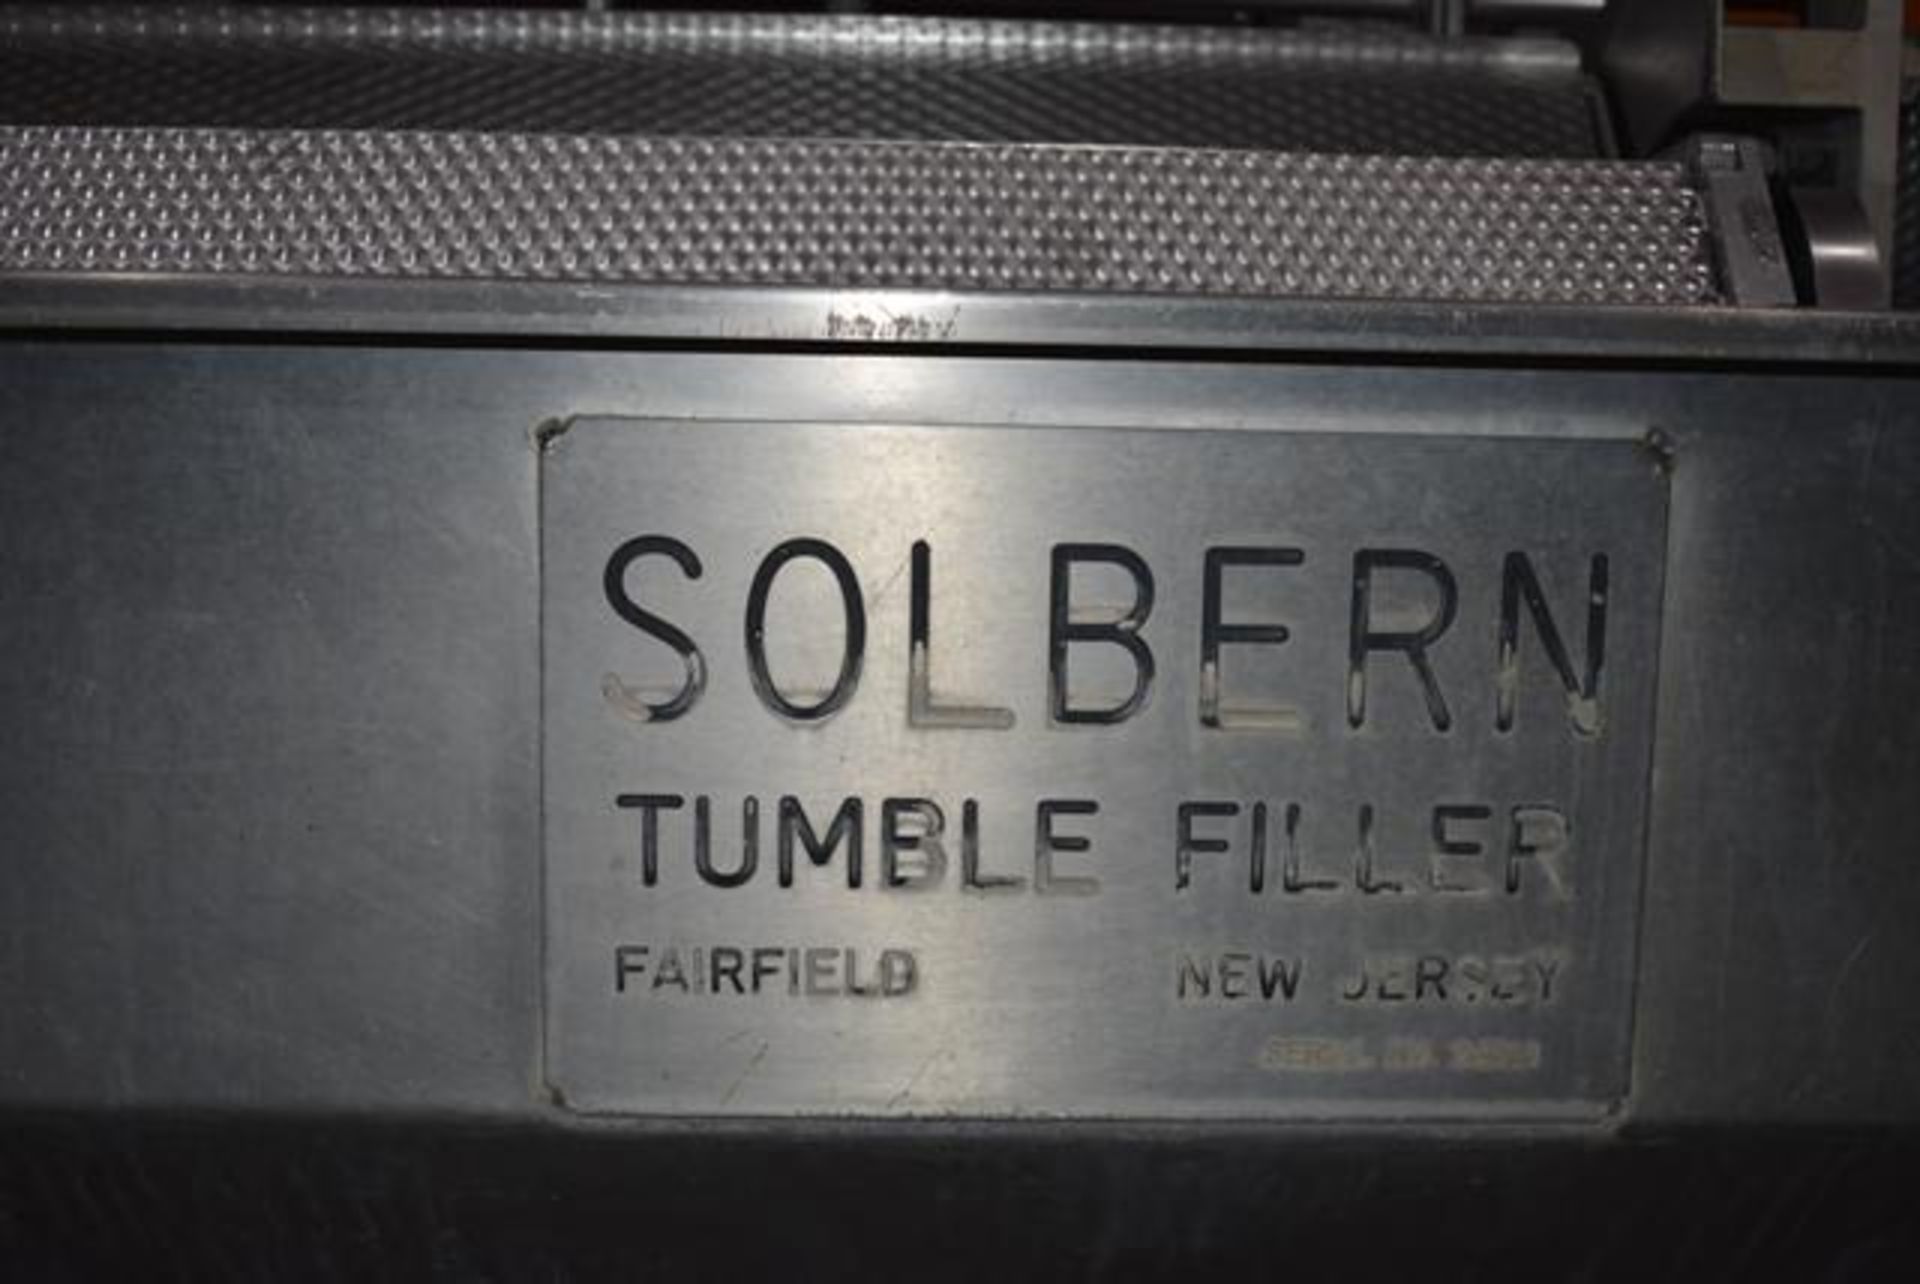 LOT 1207: Solbern Model #301 Open Style Tumble Filler, Size 300 x 407, Includes Control, RIGGING - Image 2 of 3